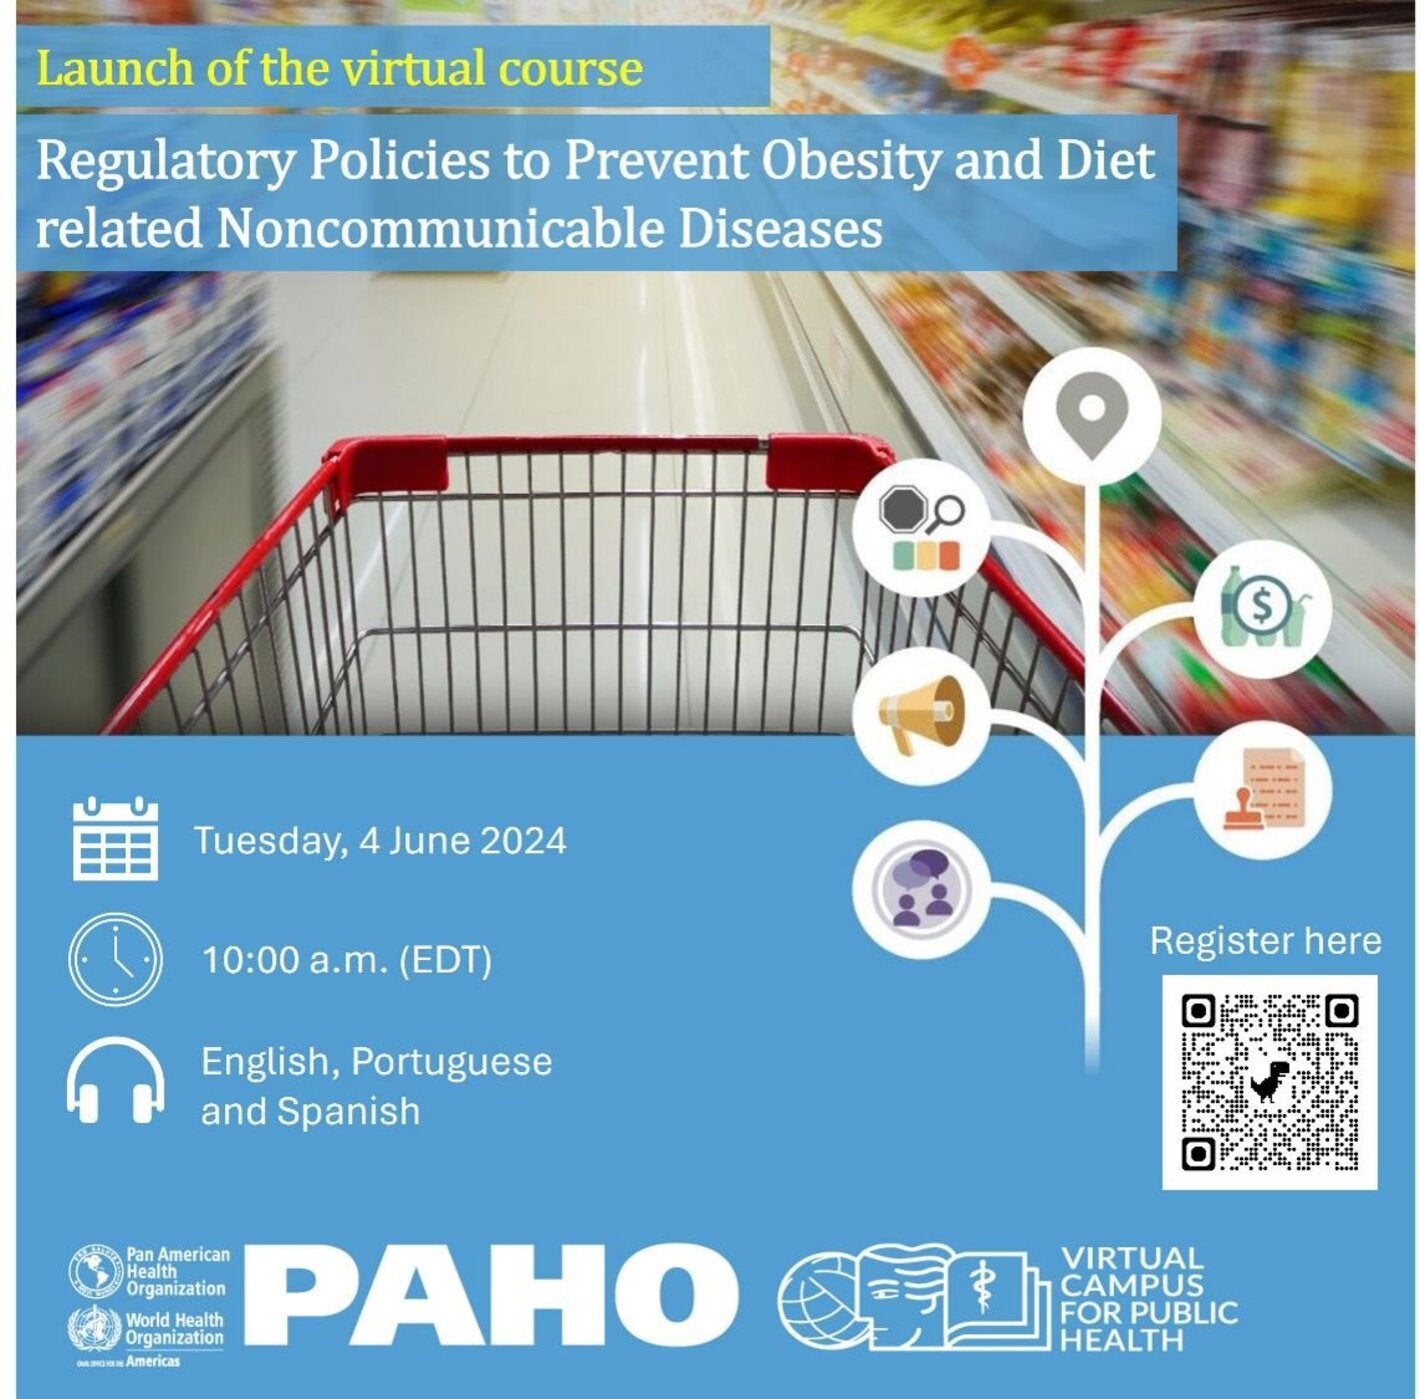 Launch of the Virtual Course on Regulatory Policies to Prevent Obesity and Diet-related Noncommunicable Diseases